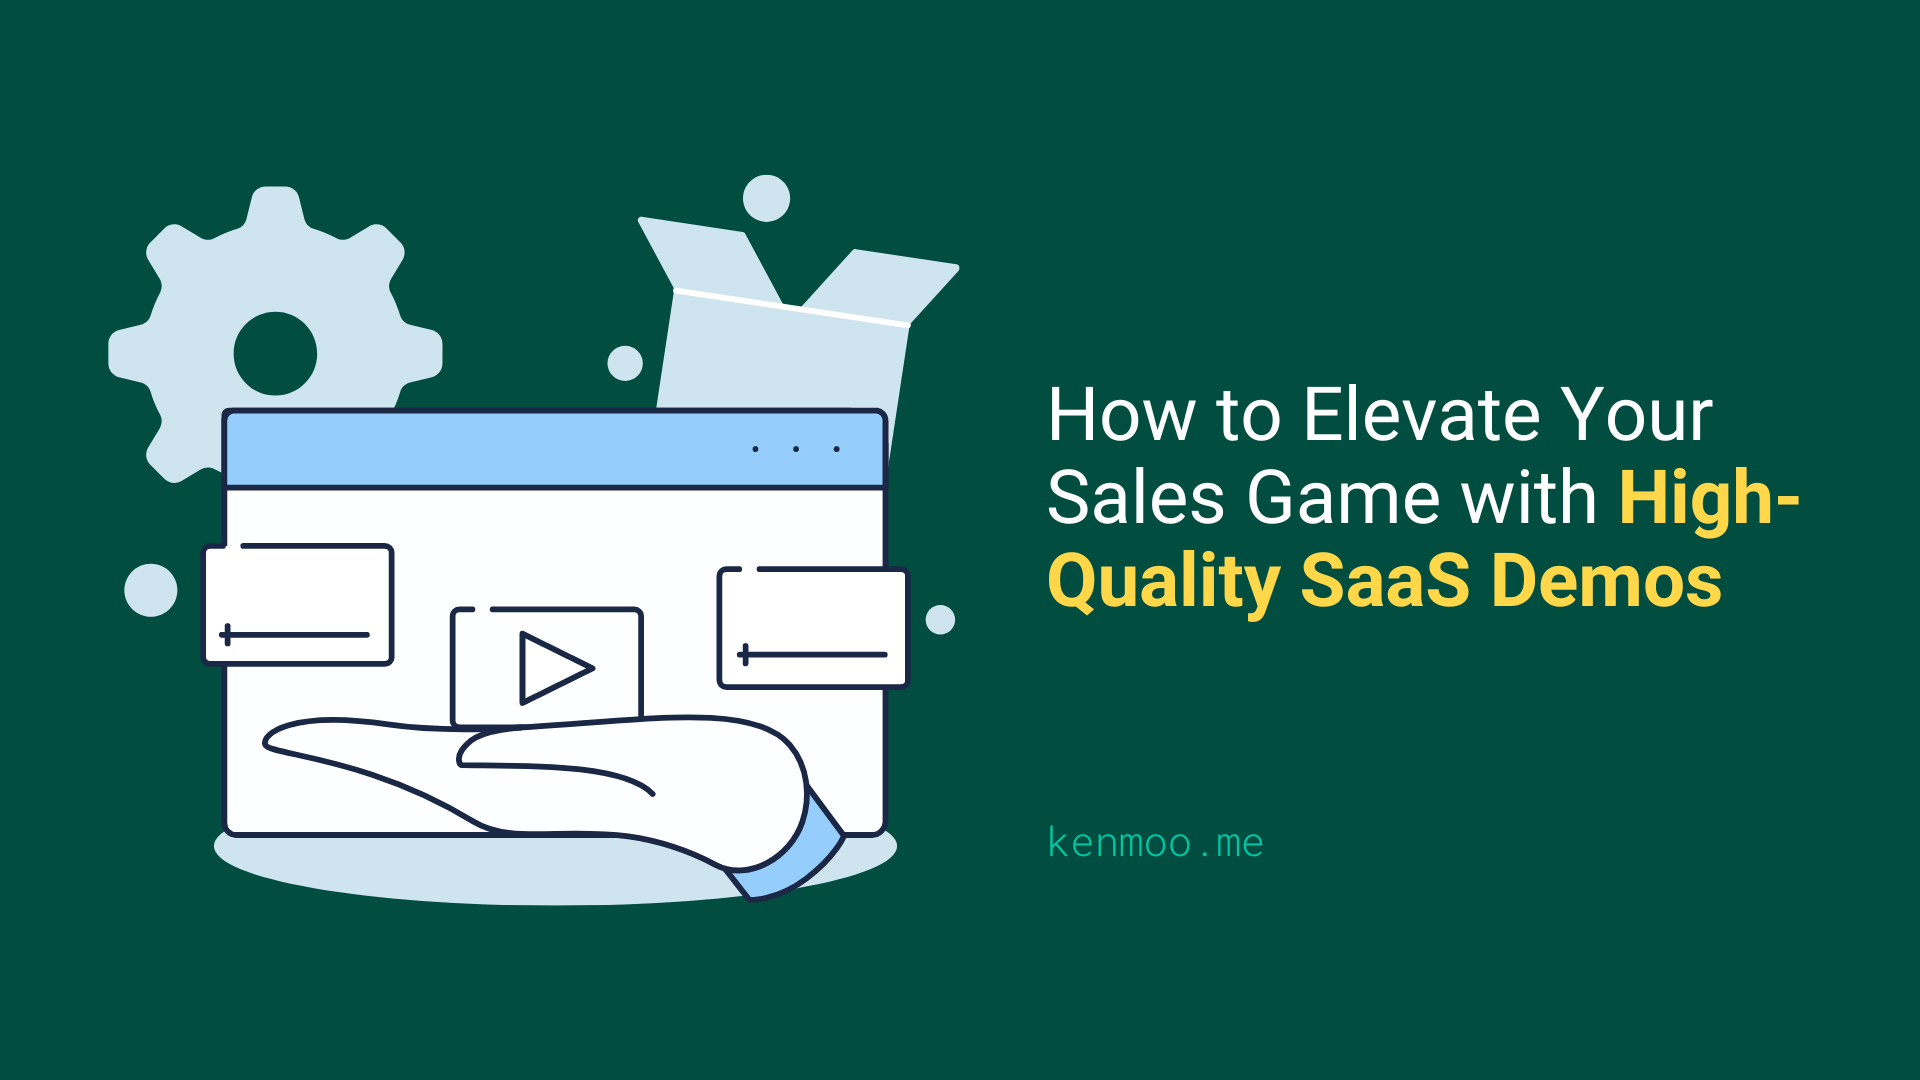 How to Elevate Your Sales Game with High-Quality SaaS Demos